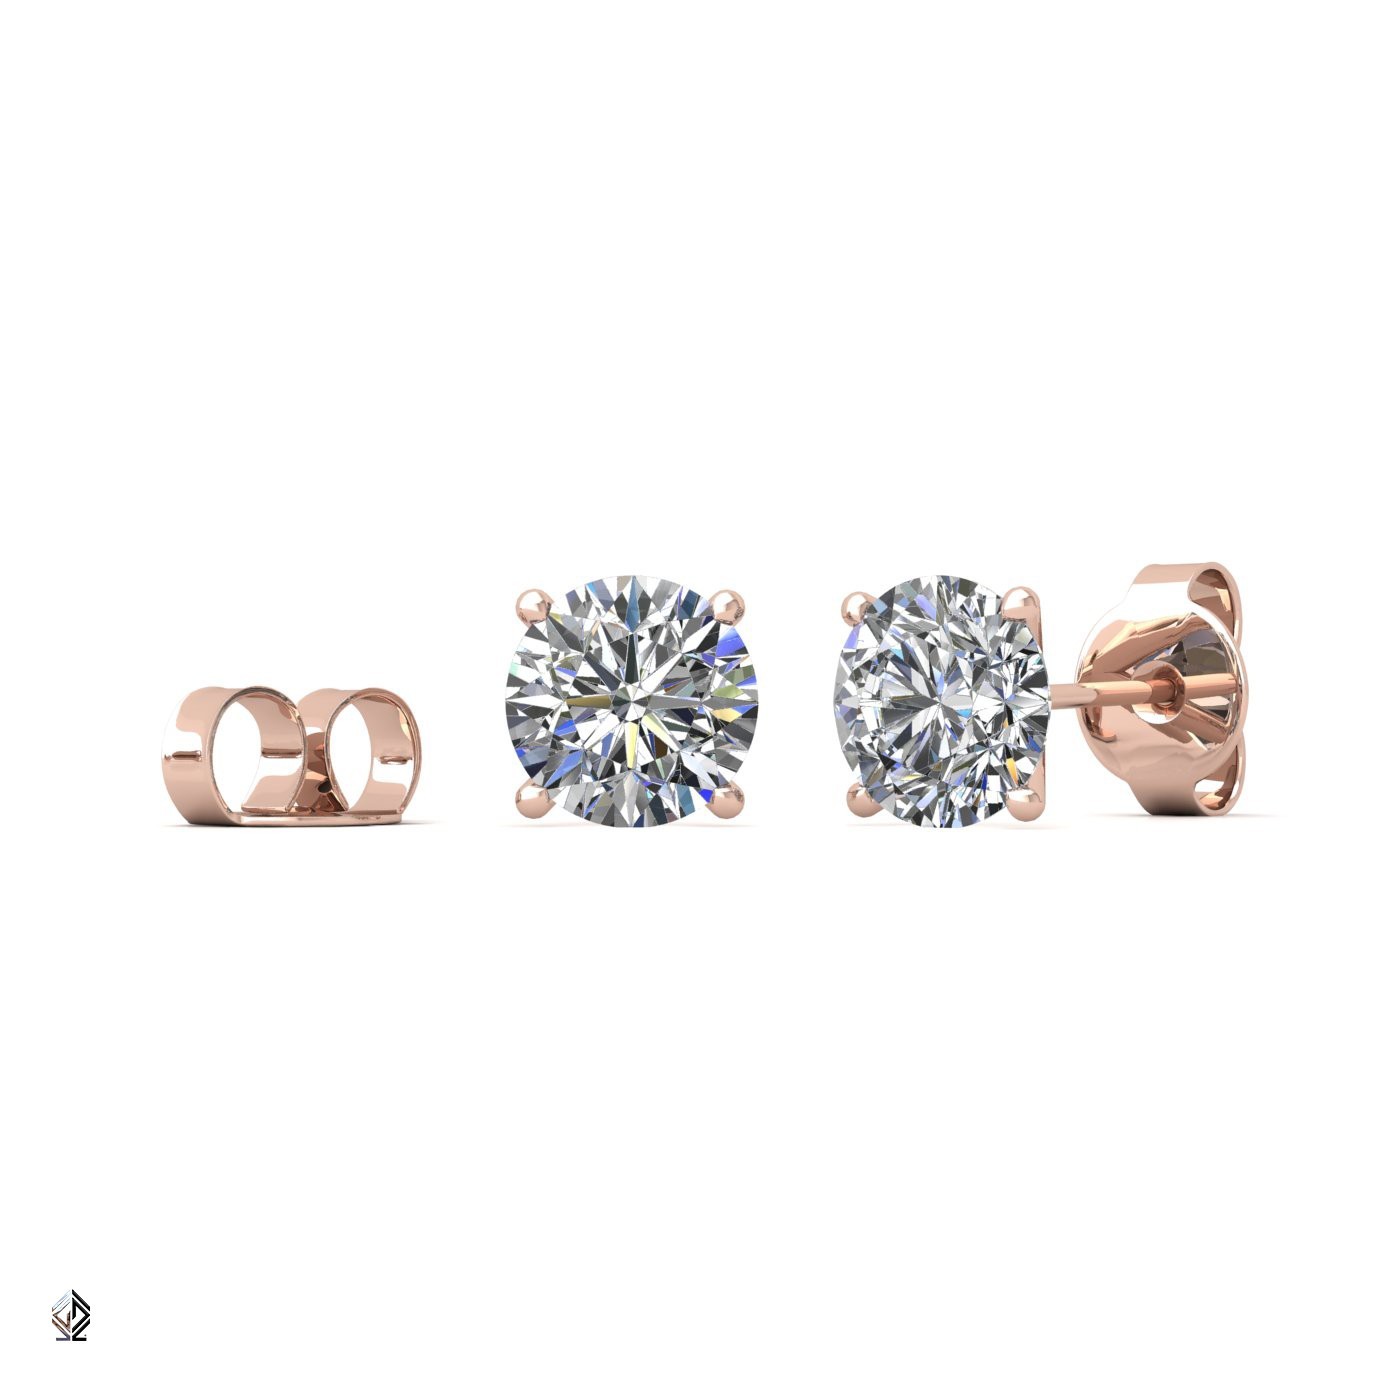 18k rose gold 1.0 ct 4 prongs round cut classic diamond earring studs Photos & images